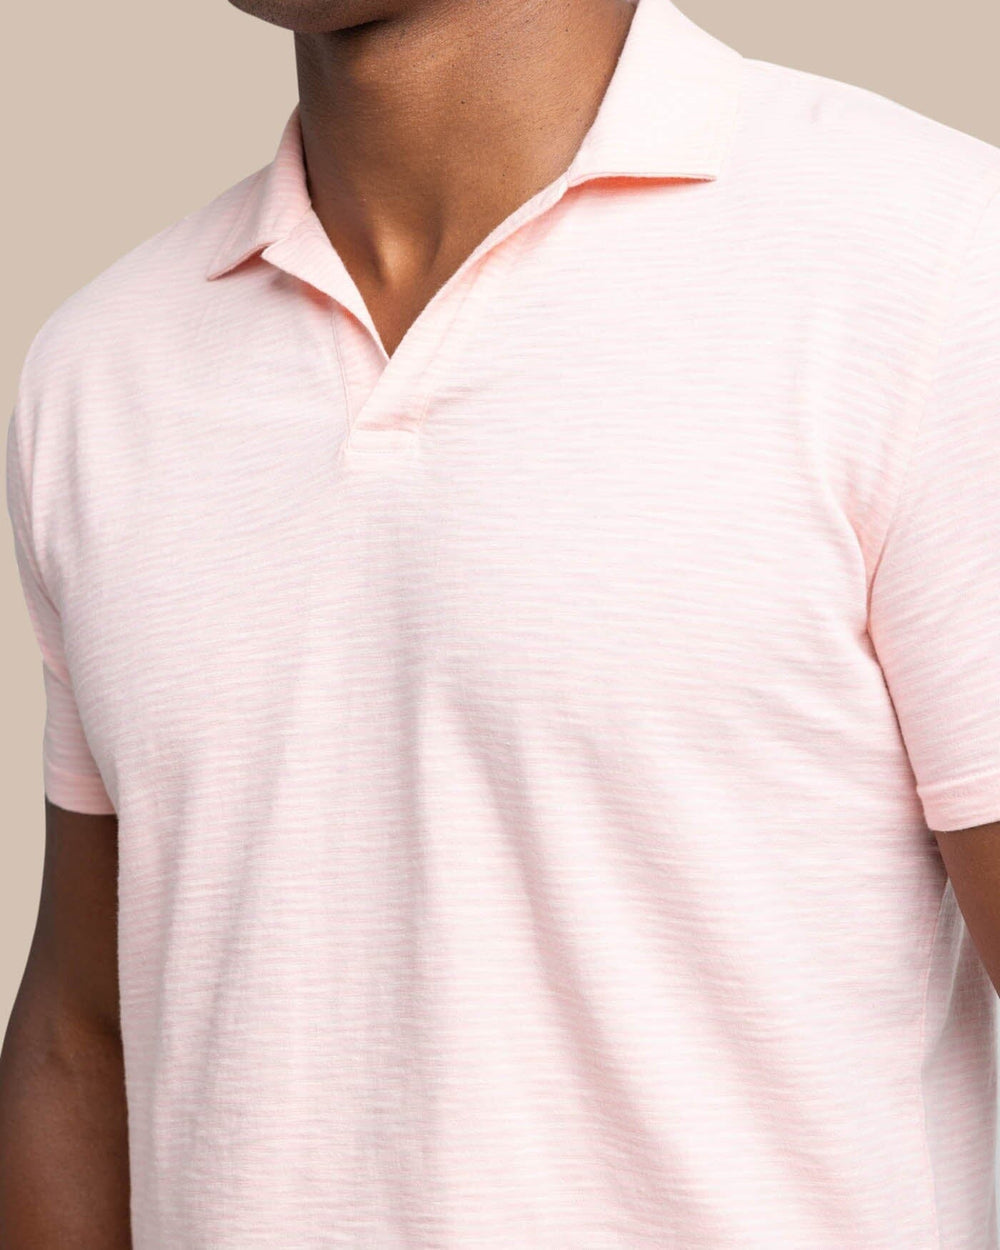 The detail view of the Southern Tide Sun Farer Summertree Stripe Polo by Southern Tide - Pale Rosette Pink